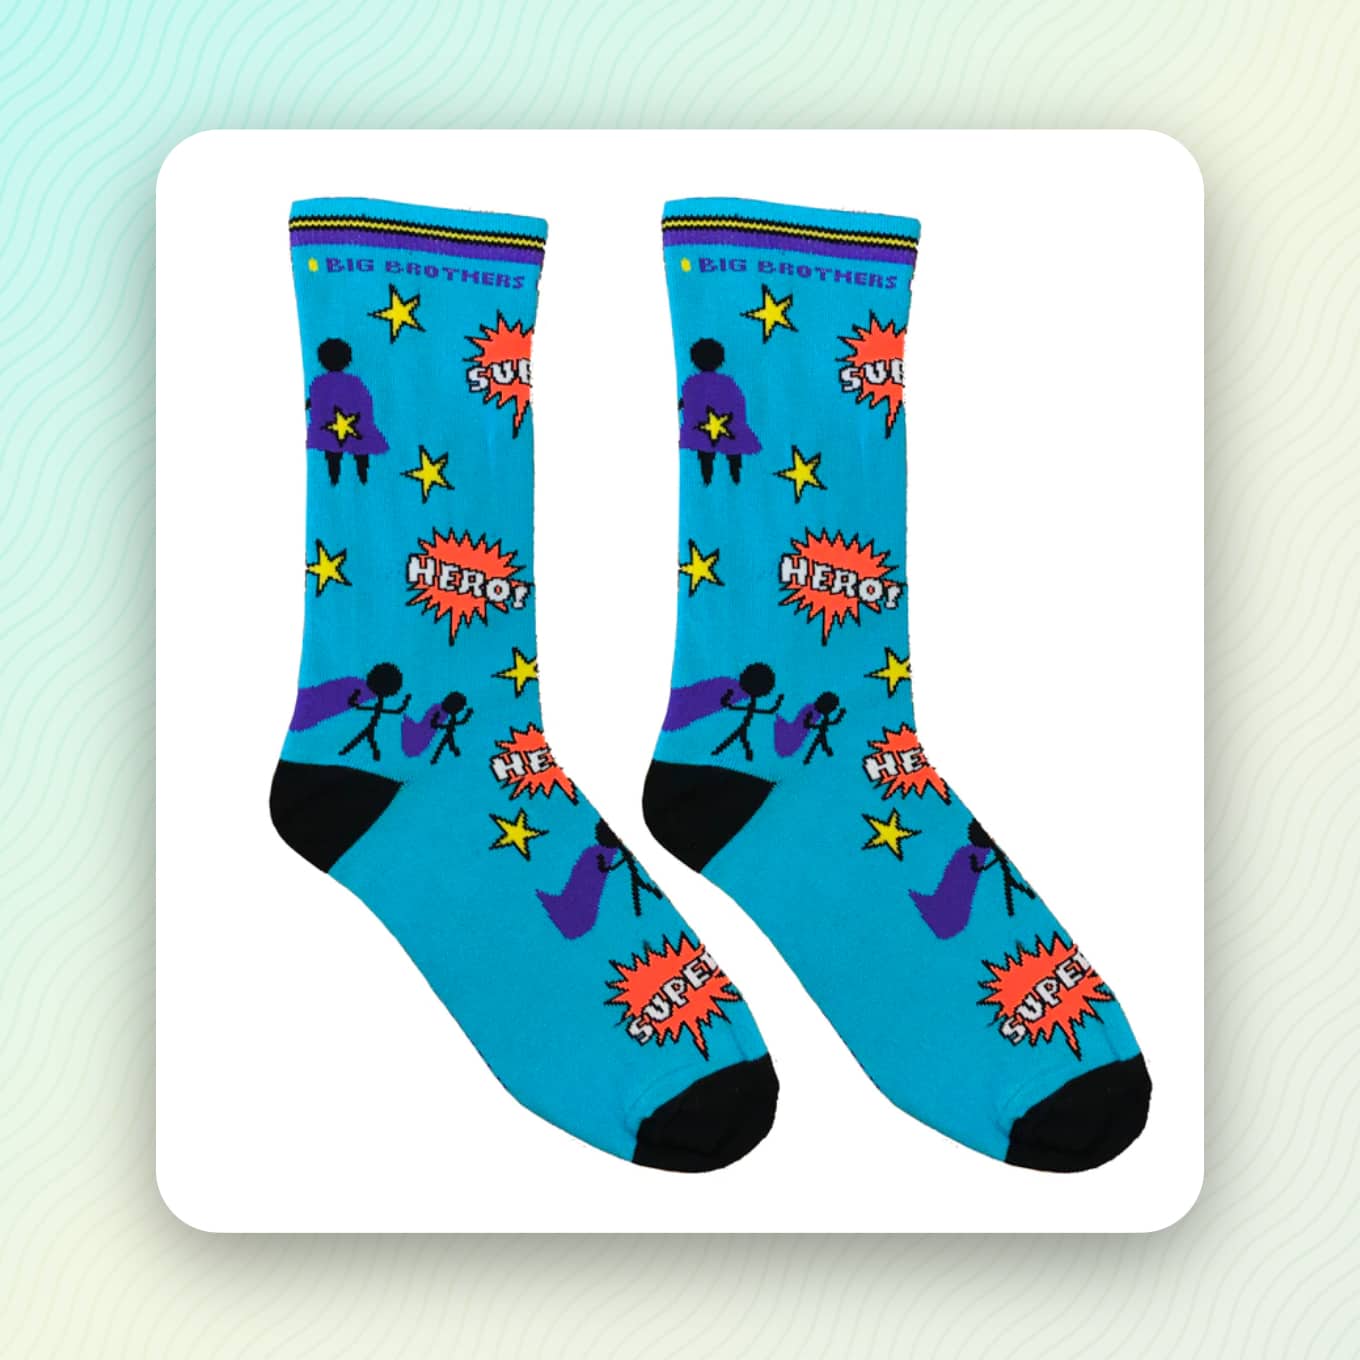 Socks that say 'Big Brothers Big Sisters' and show superheroes and the words Super and Hero